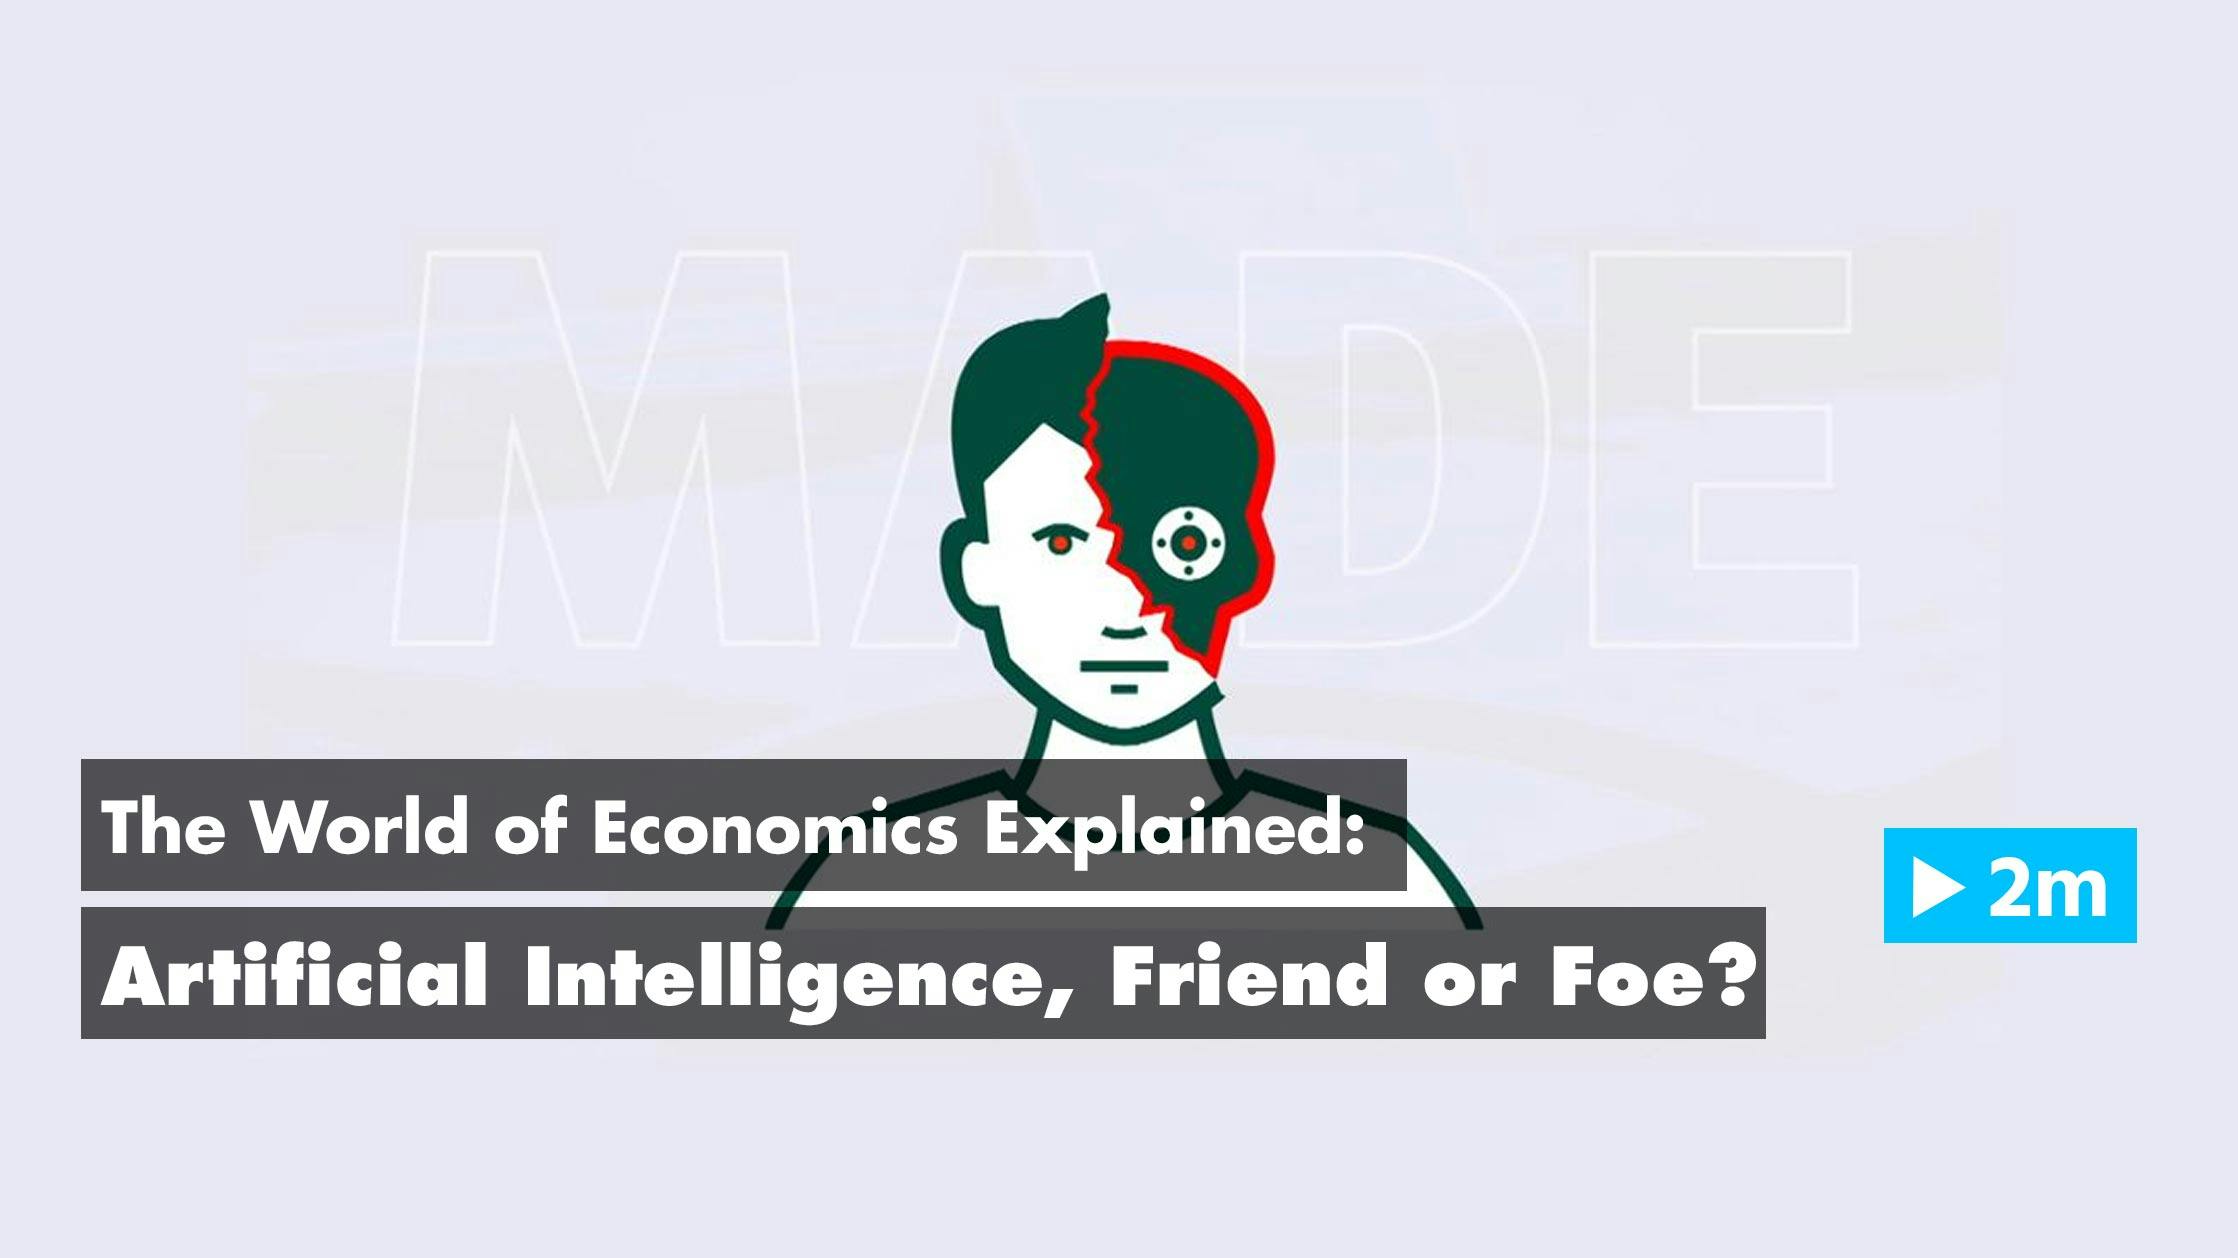 The World of Economics Explained: Artificial Intelligence, Friend or Foe?